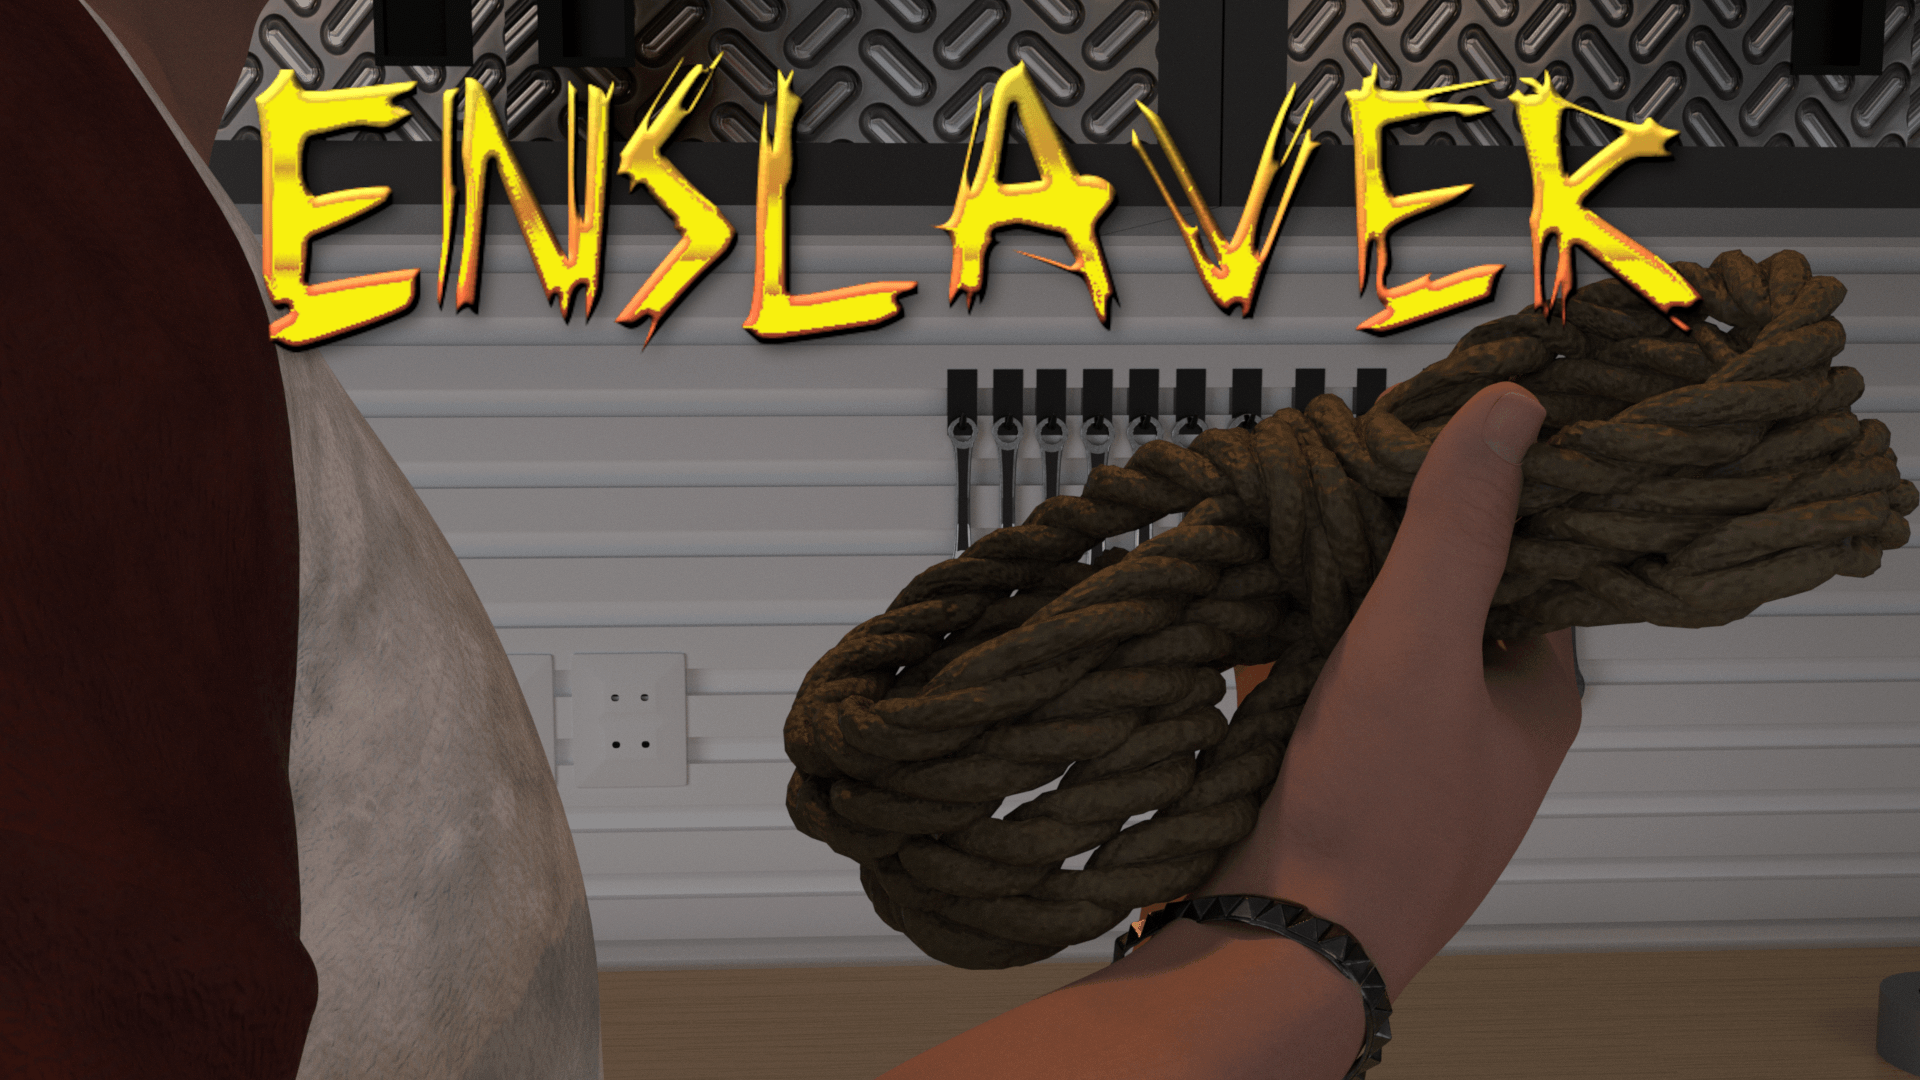 Enslaver-The beginning - PART 1 and PART 2